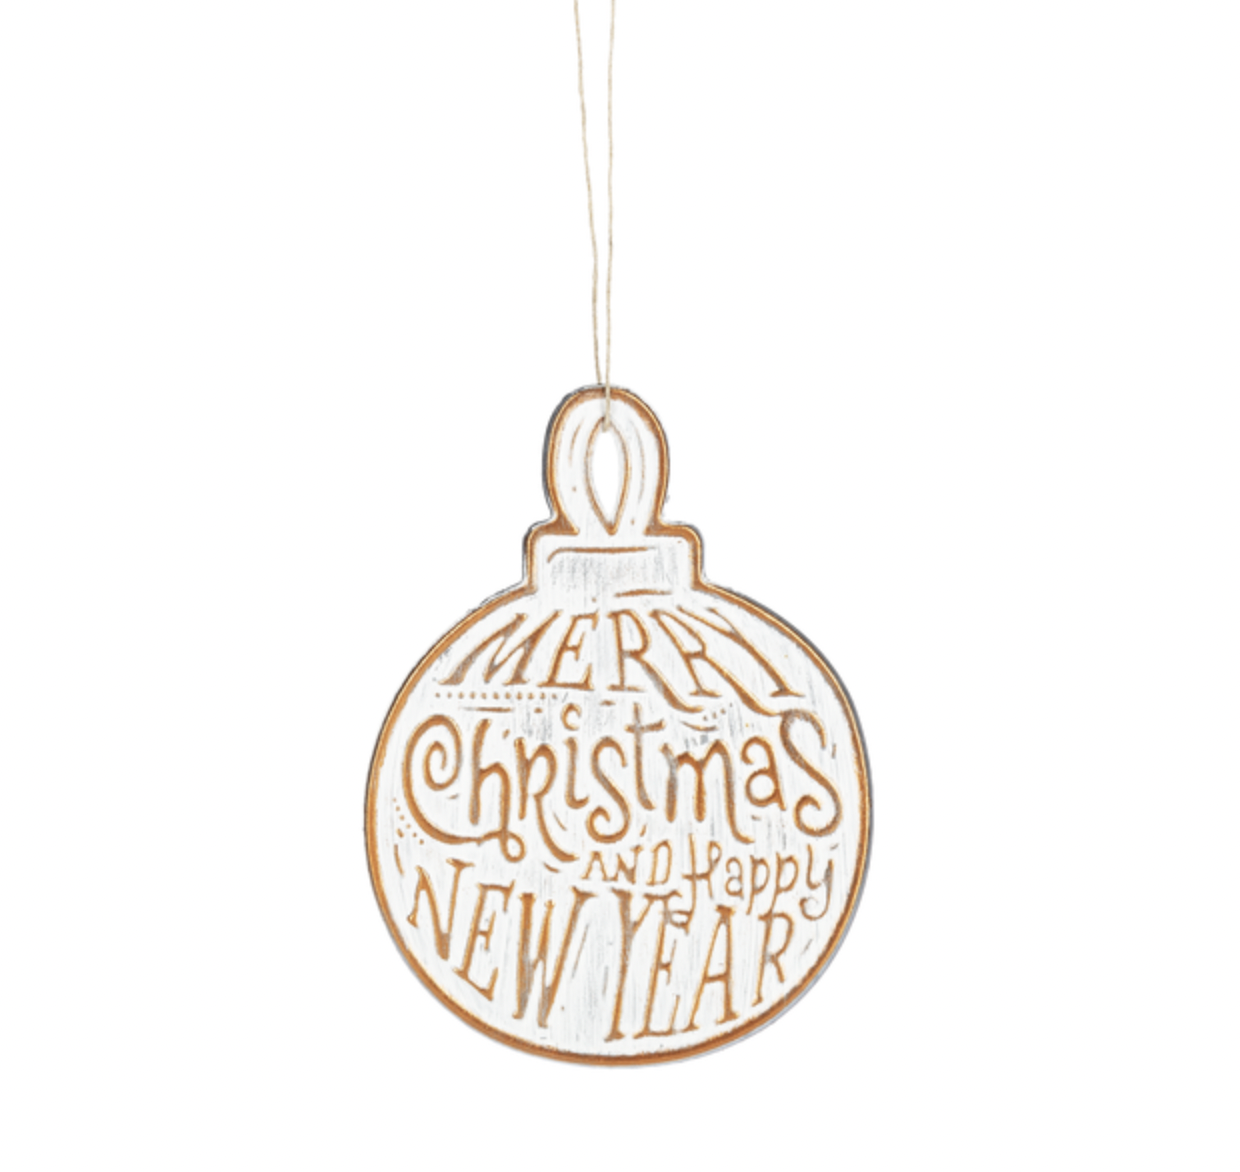 Merry Christmas Copper Embossed Ornament